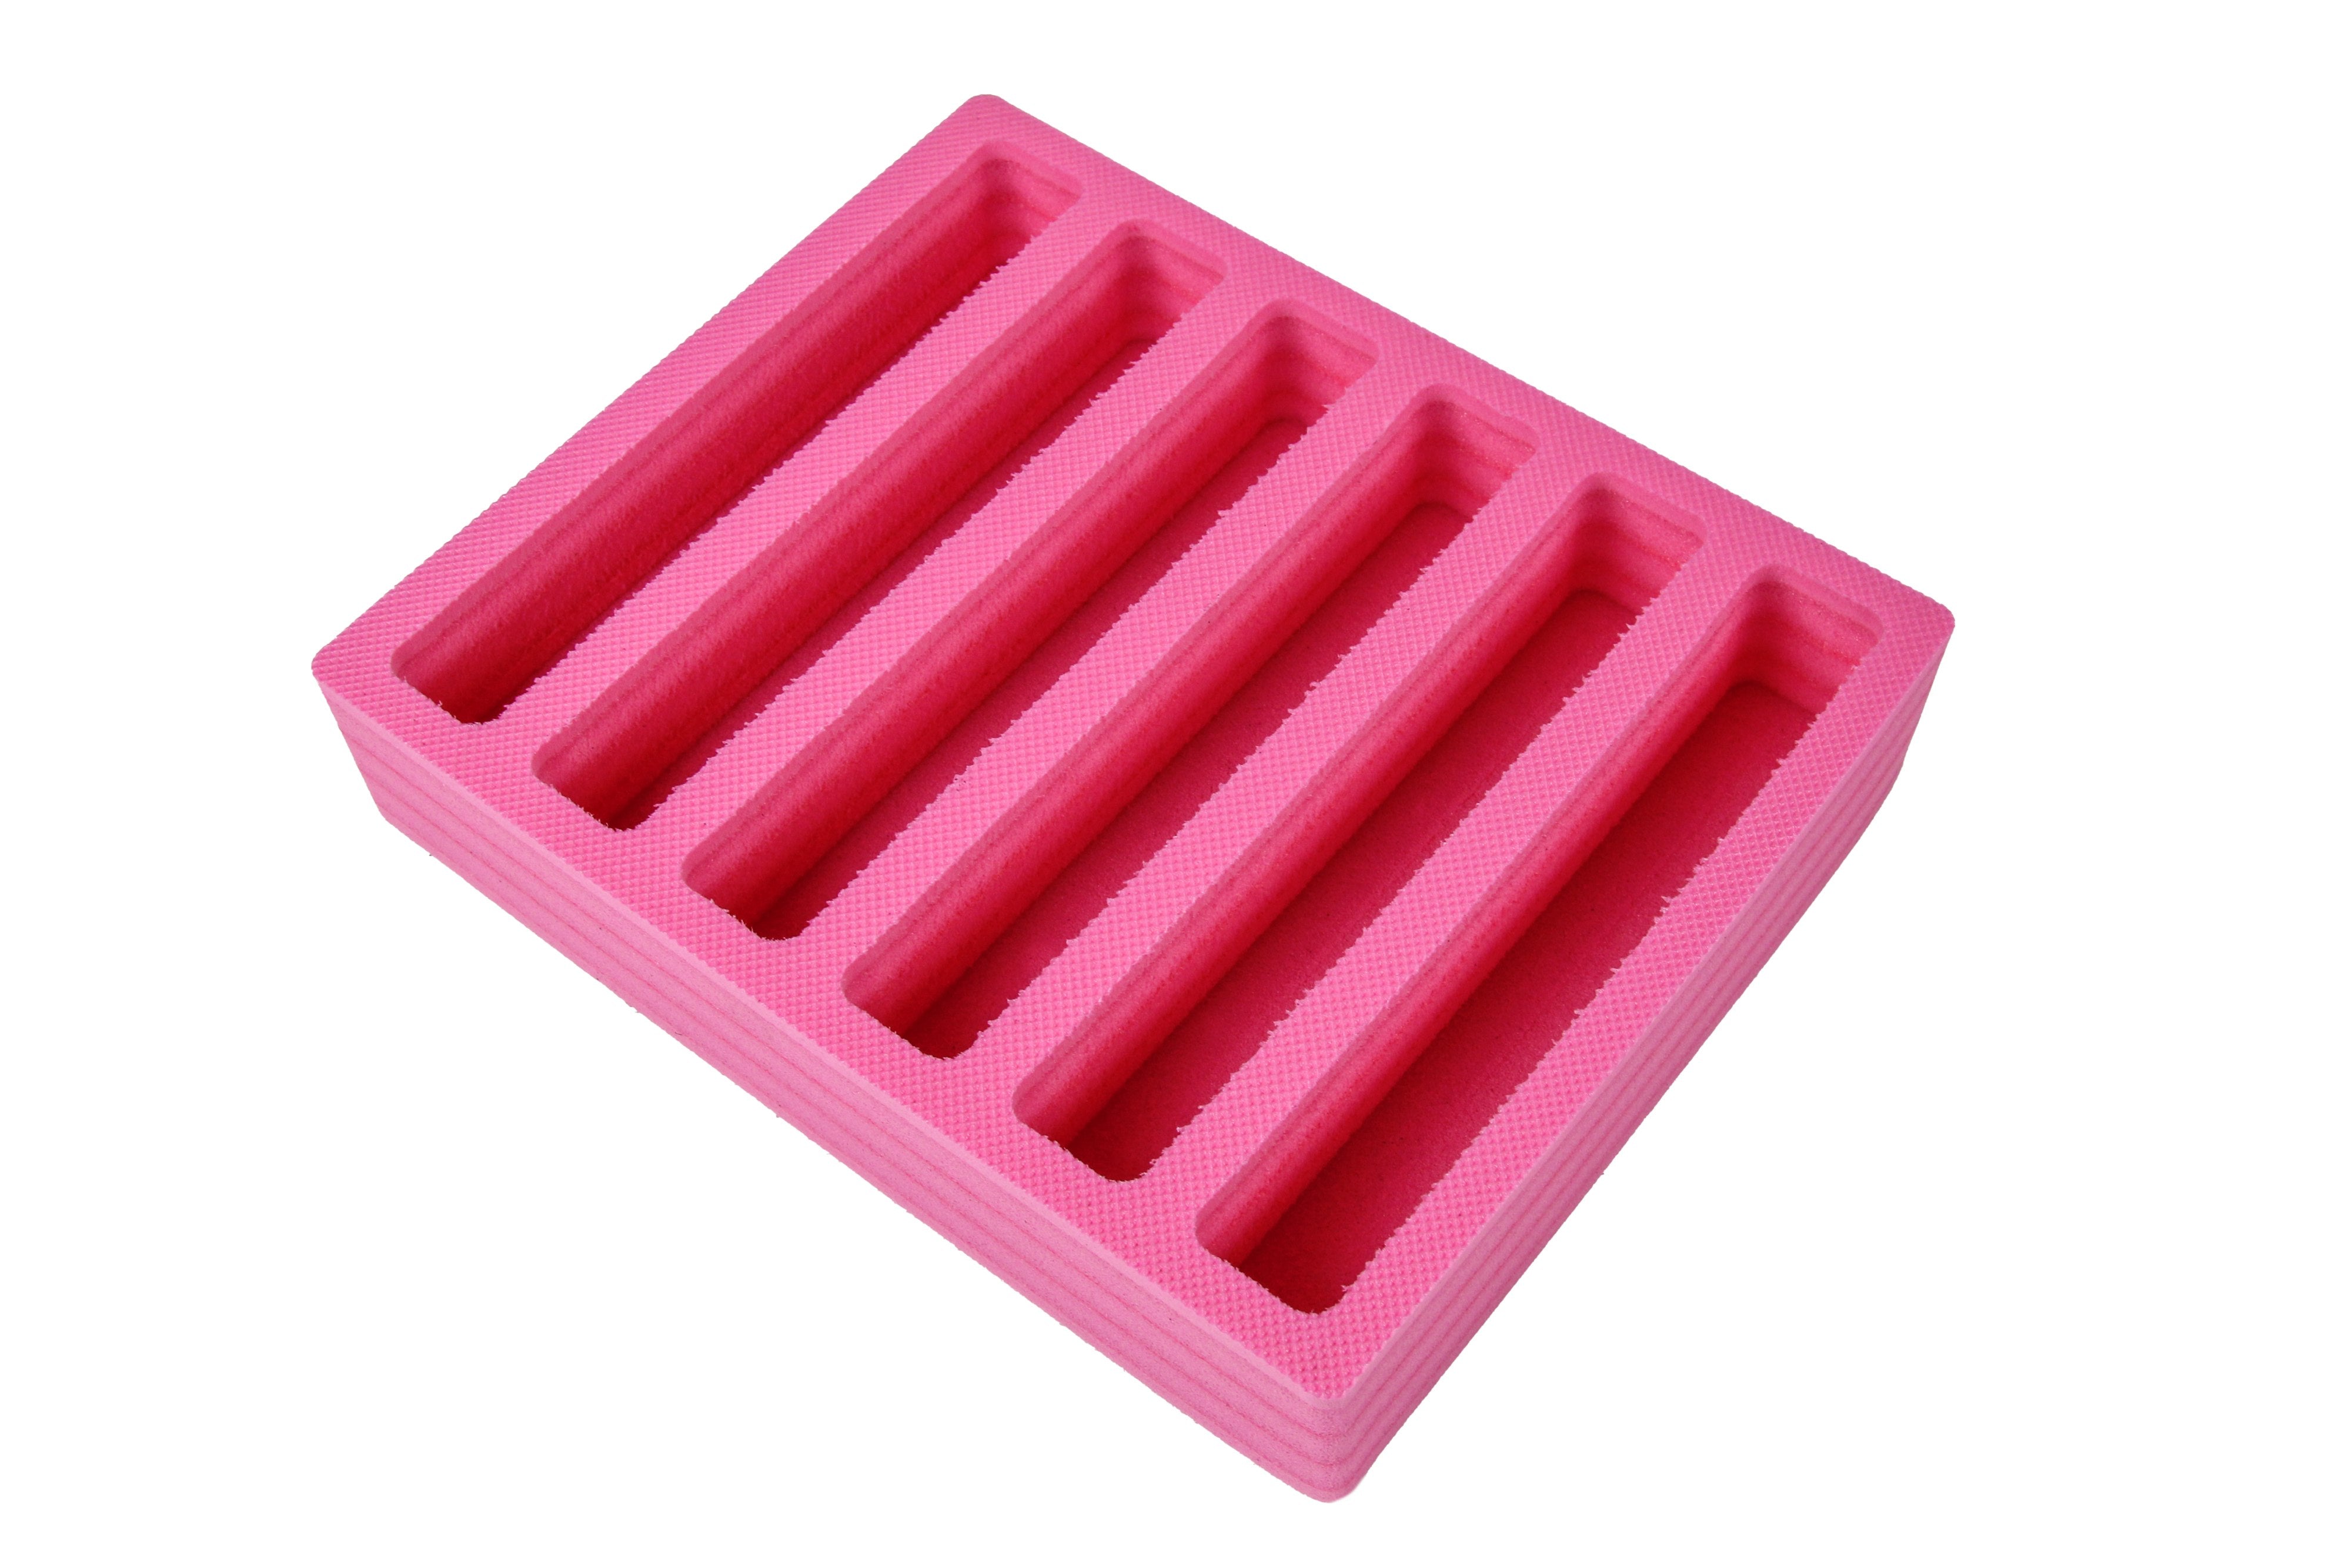 Polar Whale Nail Polish Drawer Organizer Tray Durable Pink Foam Washable Waterproof Insert for Home Bathroom Bedroom Office 8.9 x 10.9 Holds up to 36